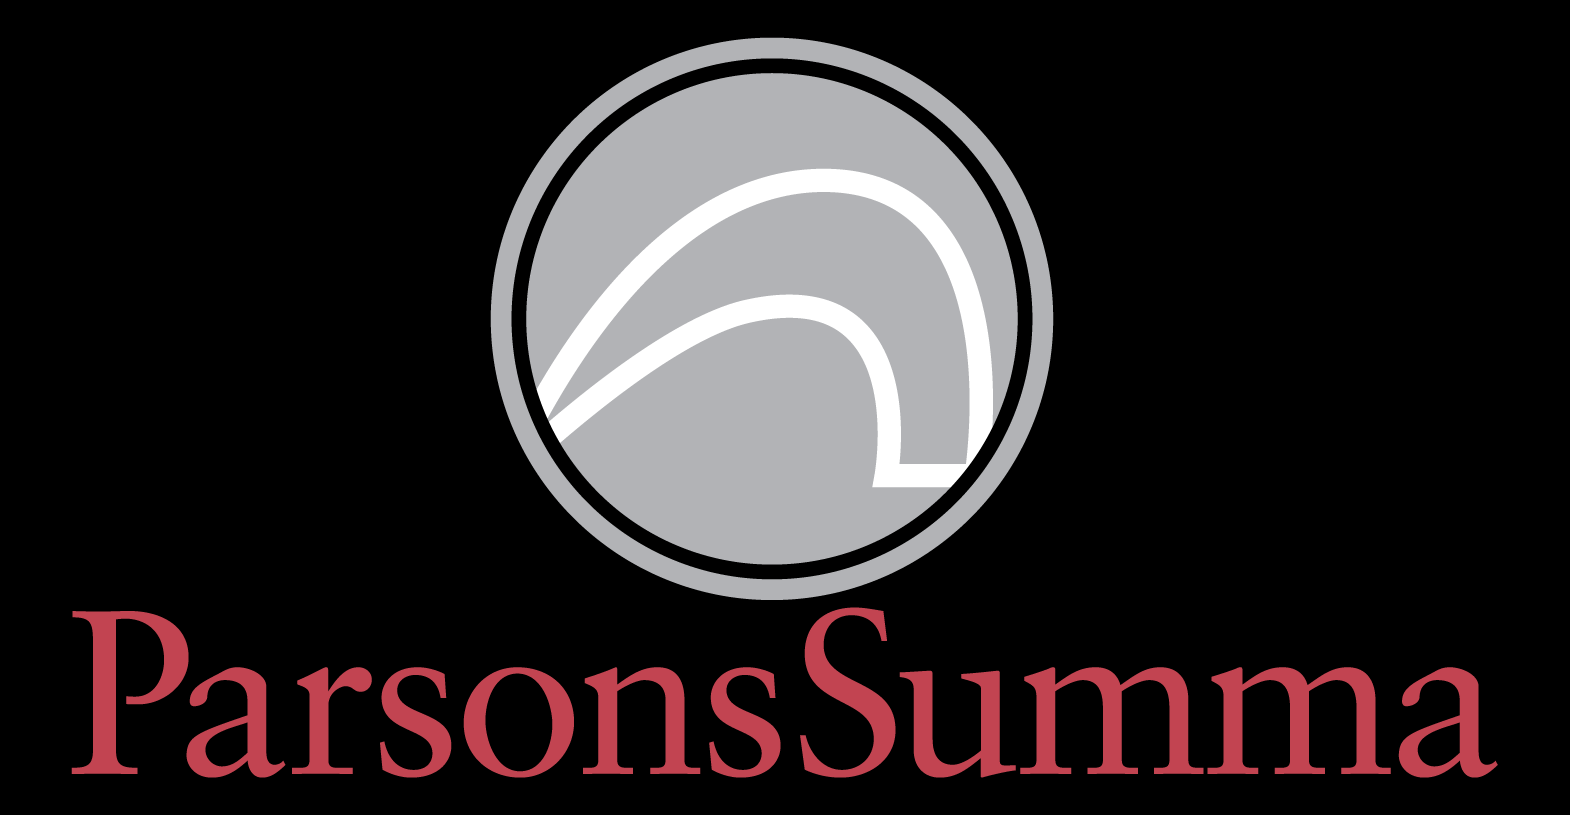 Parsons Summa is A Charlotte, North Carolina Law firm specializing in Patent Law and Labor, Employment Law.